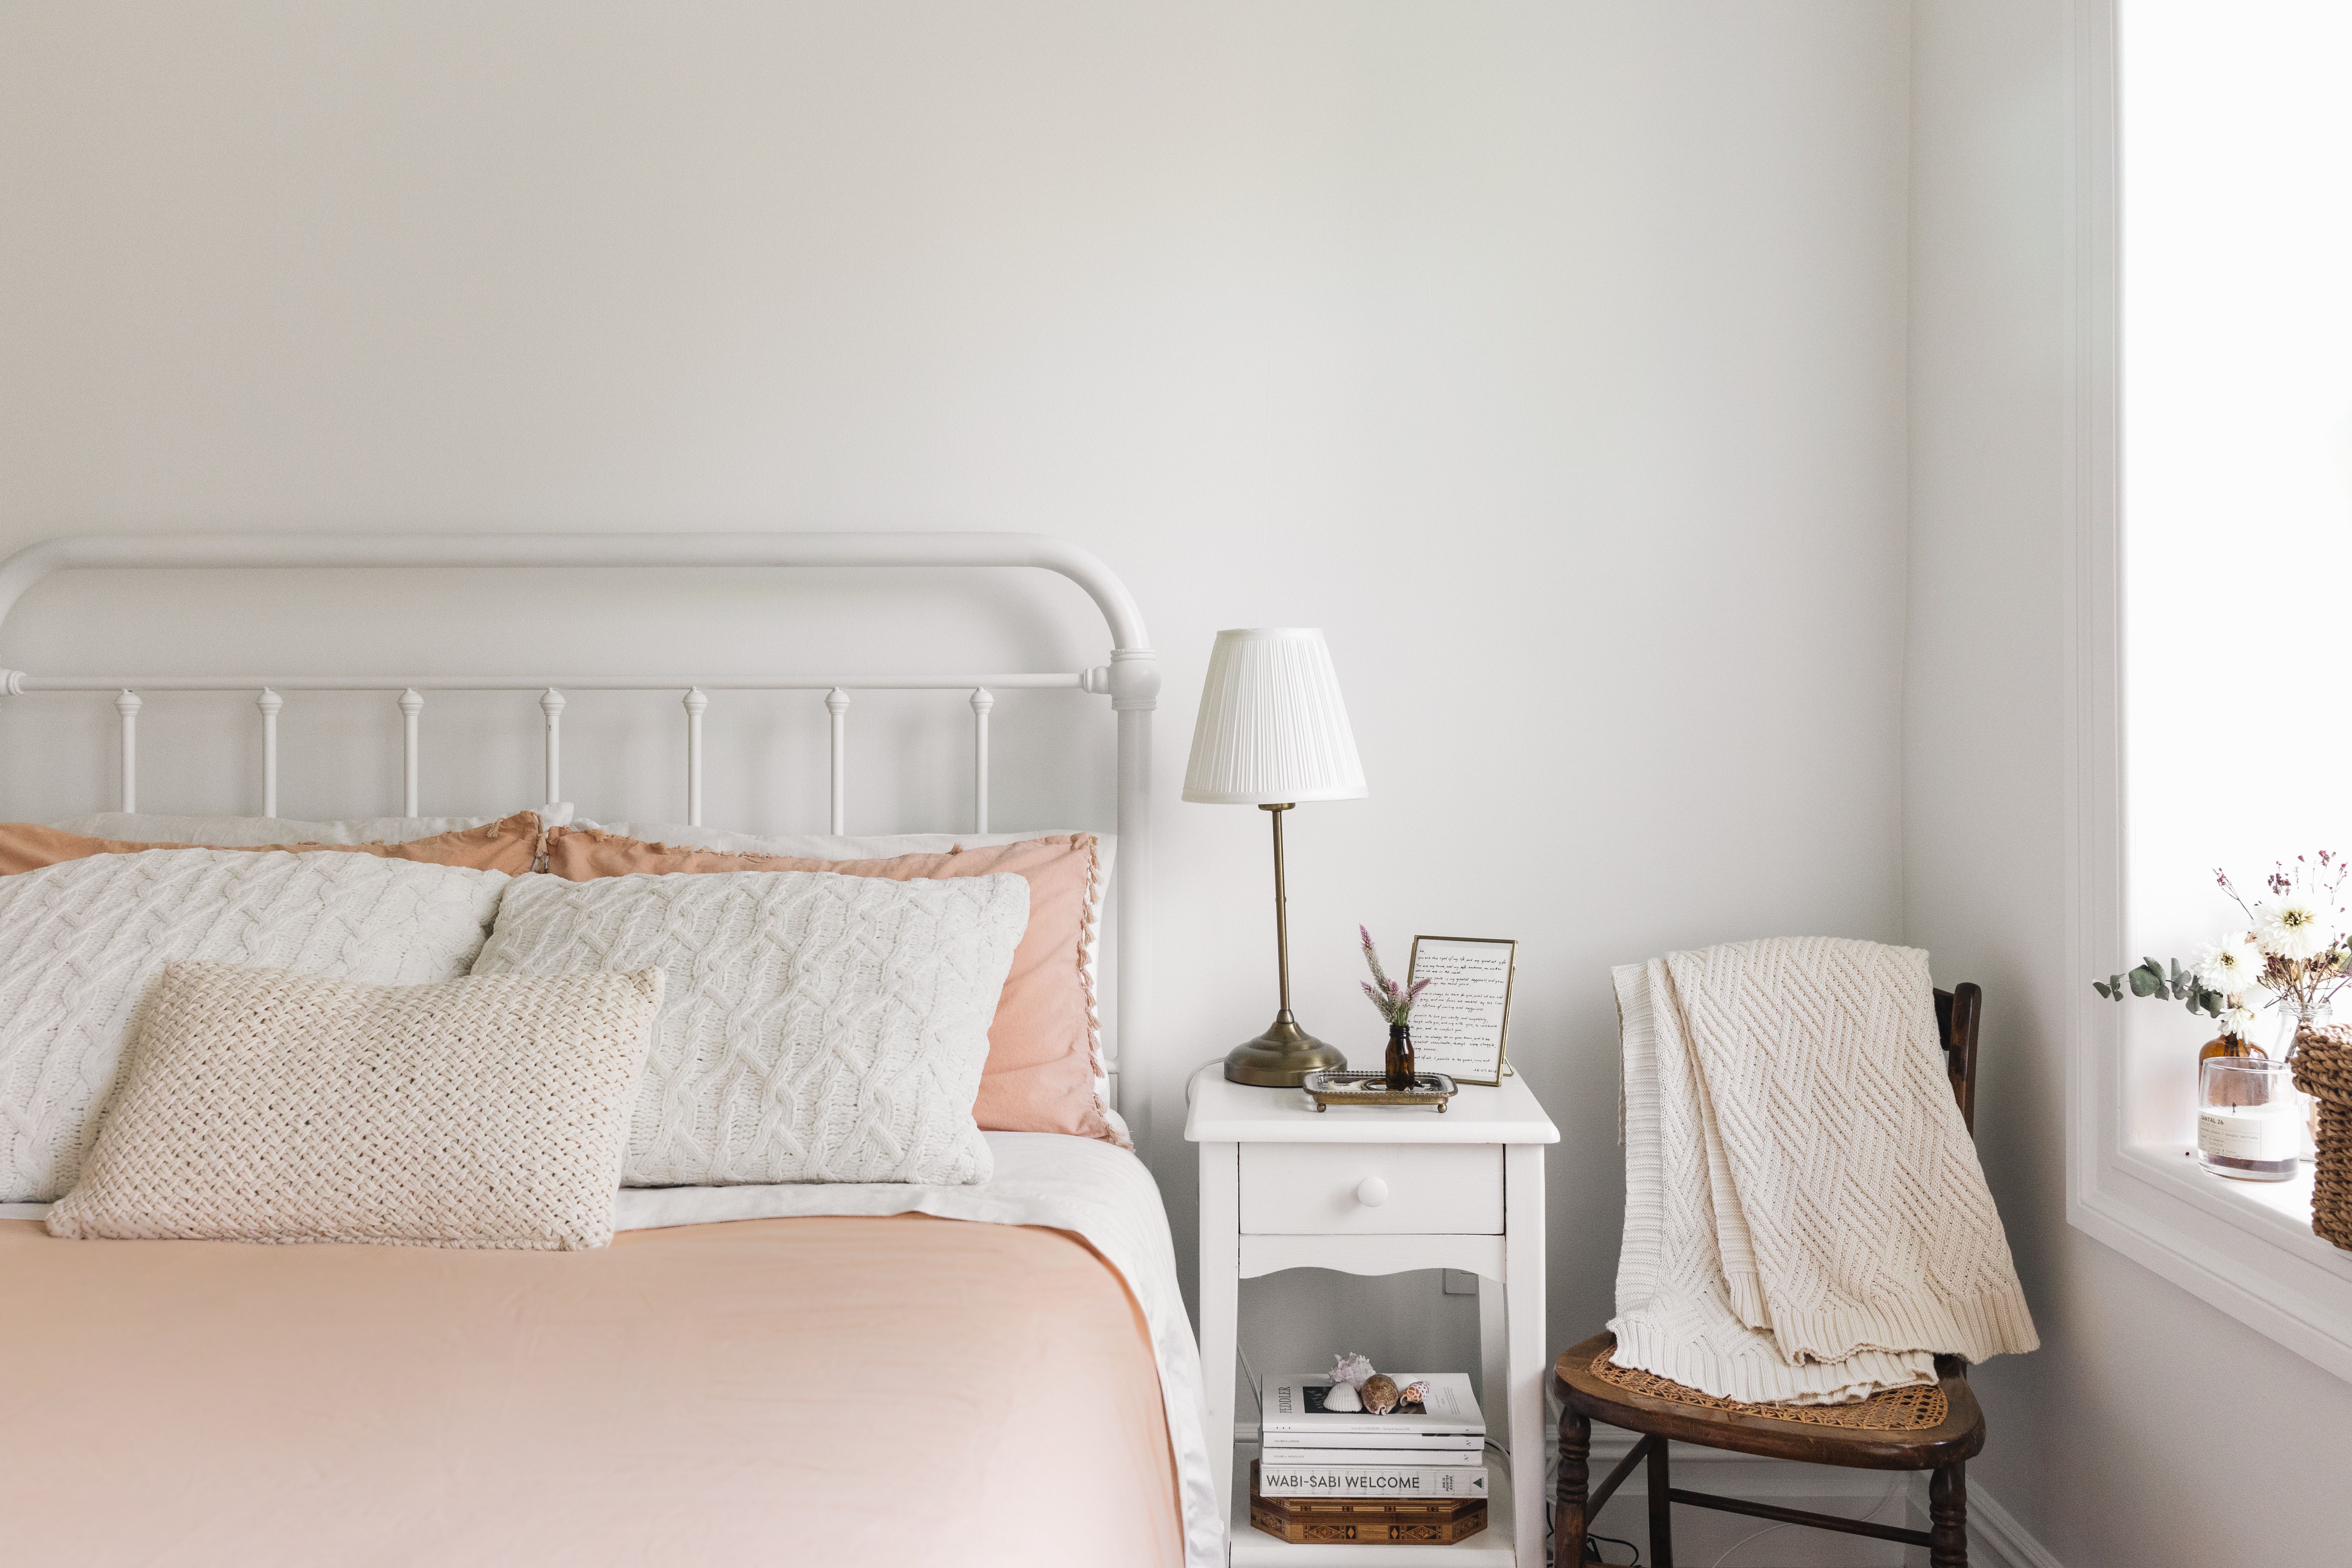 7 Tips to Make Your Bed Like a Pro